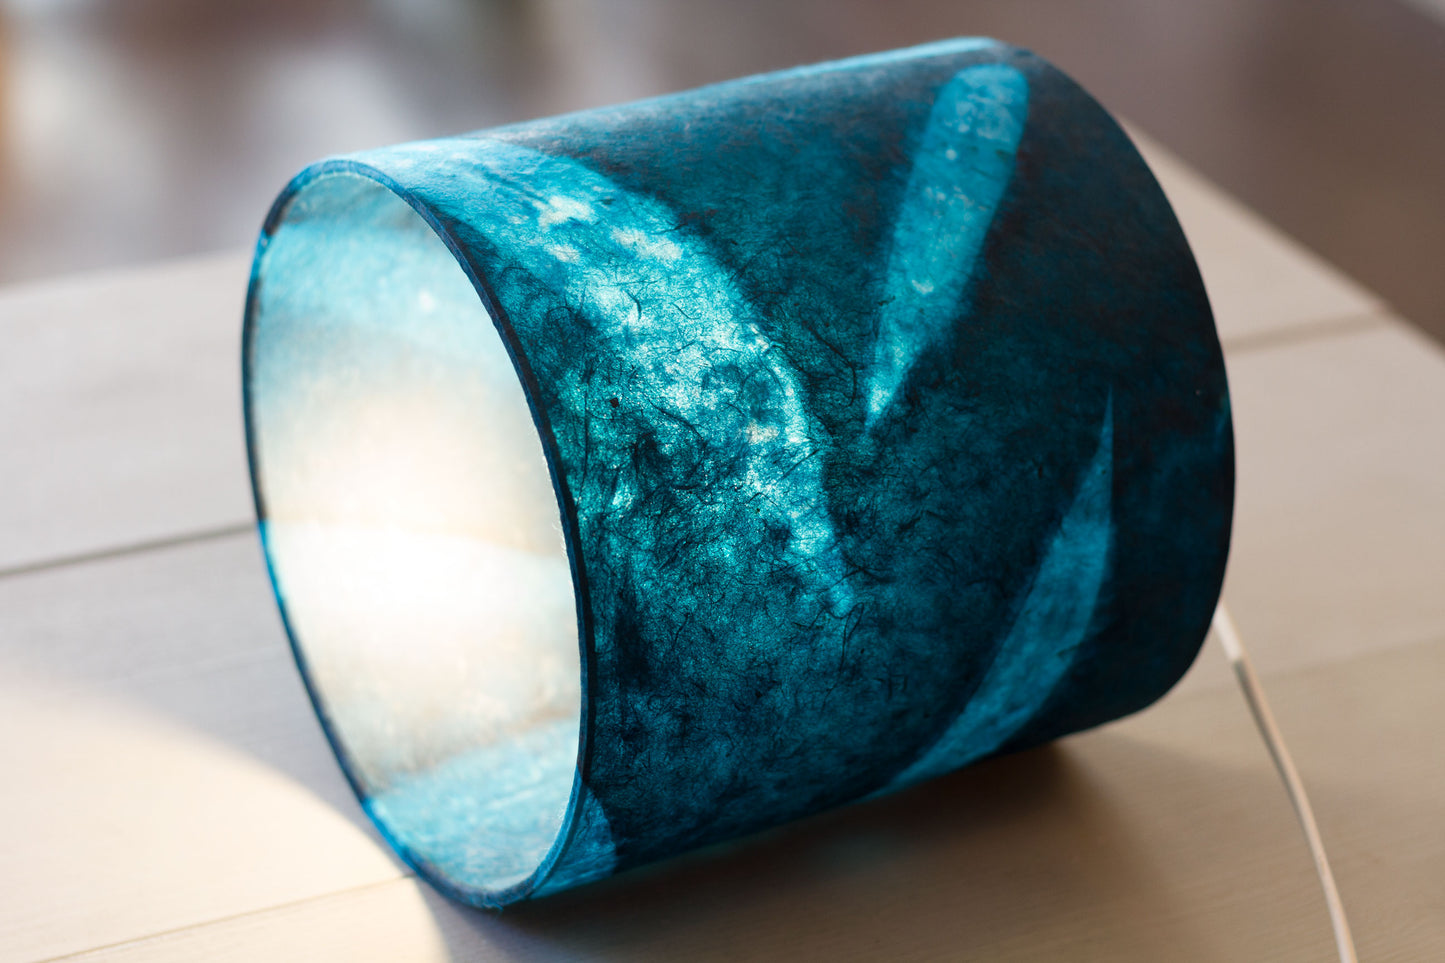 Square Lamp Shade - P99 - Resistance Dyed Teal Bamboo, 20cm(w) x 30cm(h) x 20cm(d)